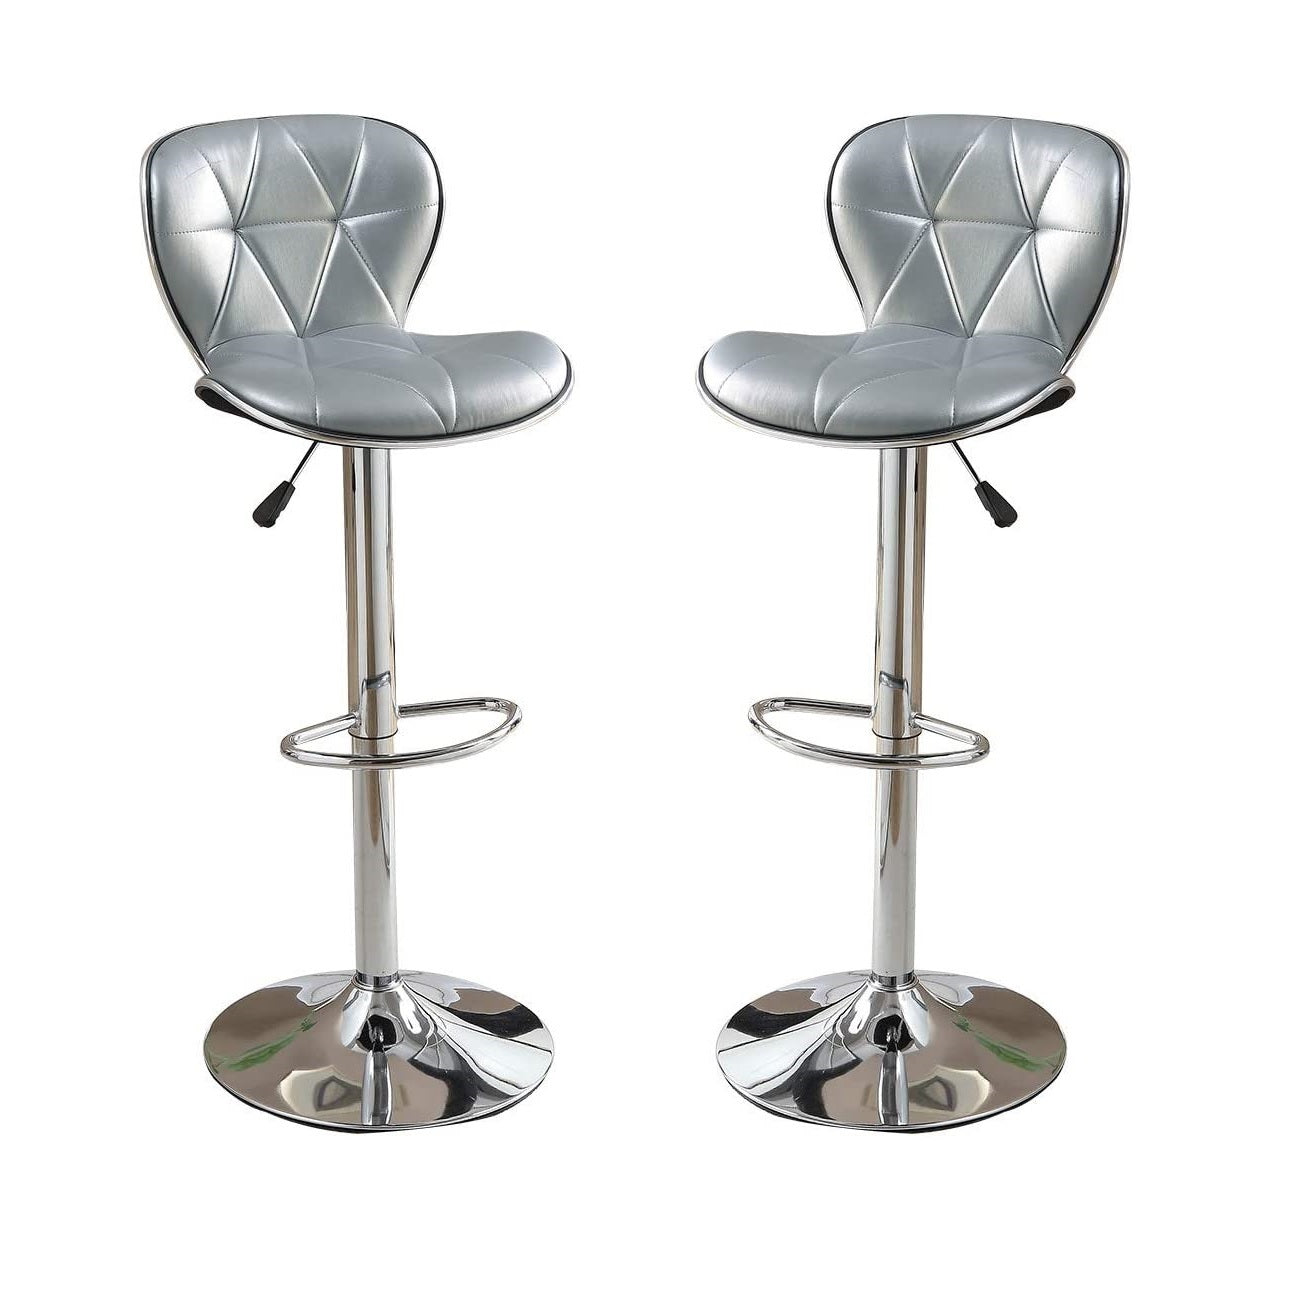 ZNTS Silver / Grey Faux Leather PVC Stool Counter Height Chairs Set of 2 Adjustable Height Kitchen Island B01149737